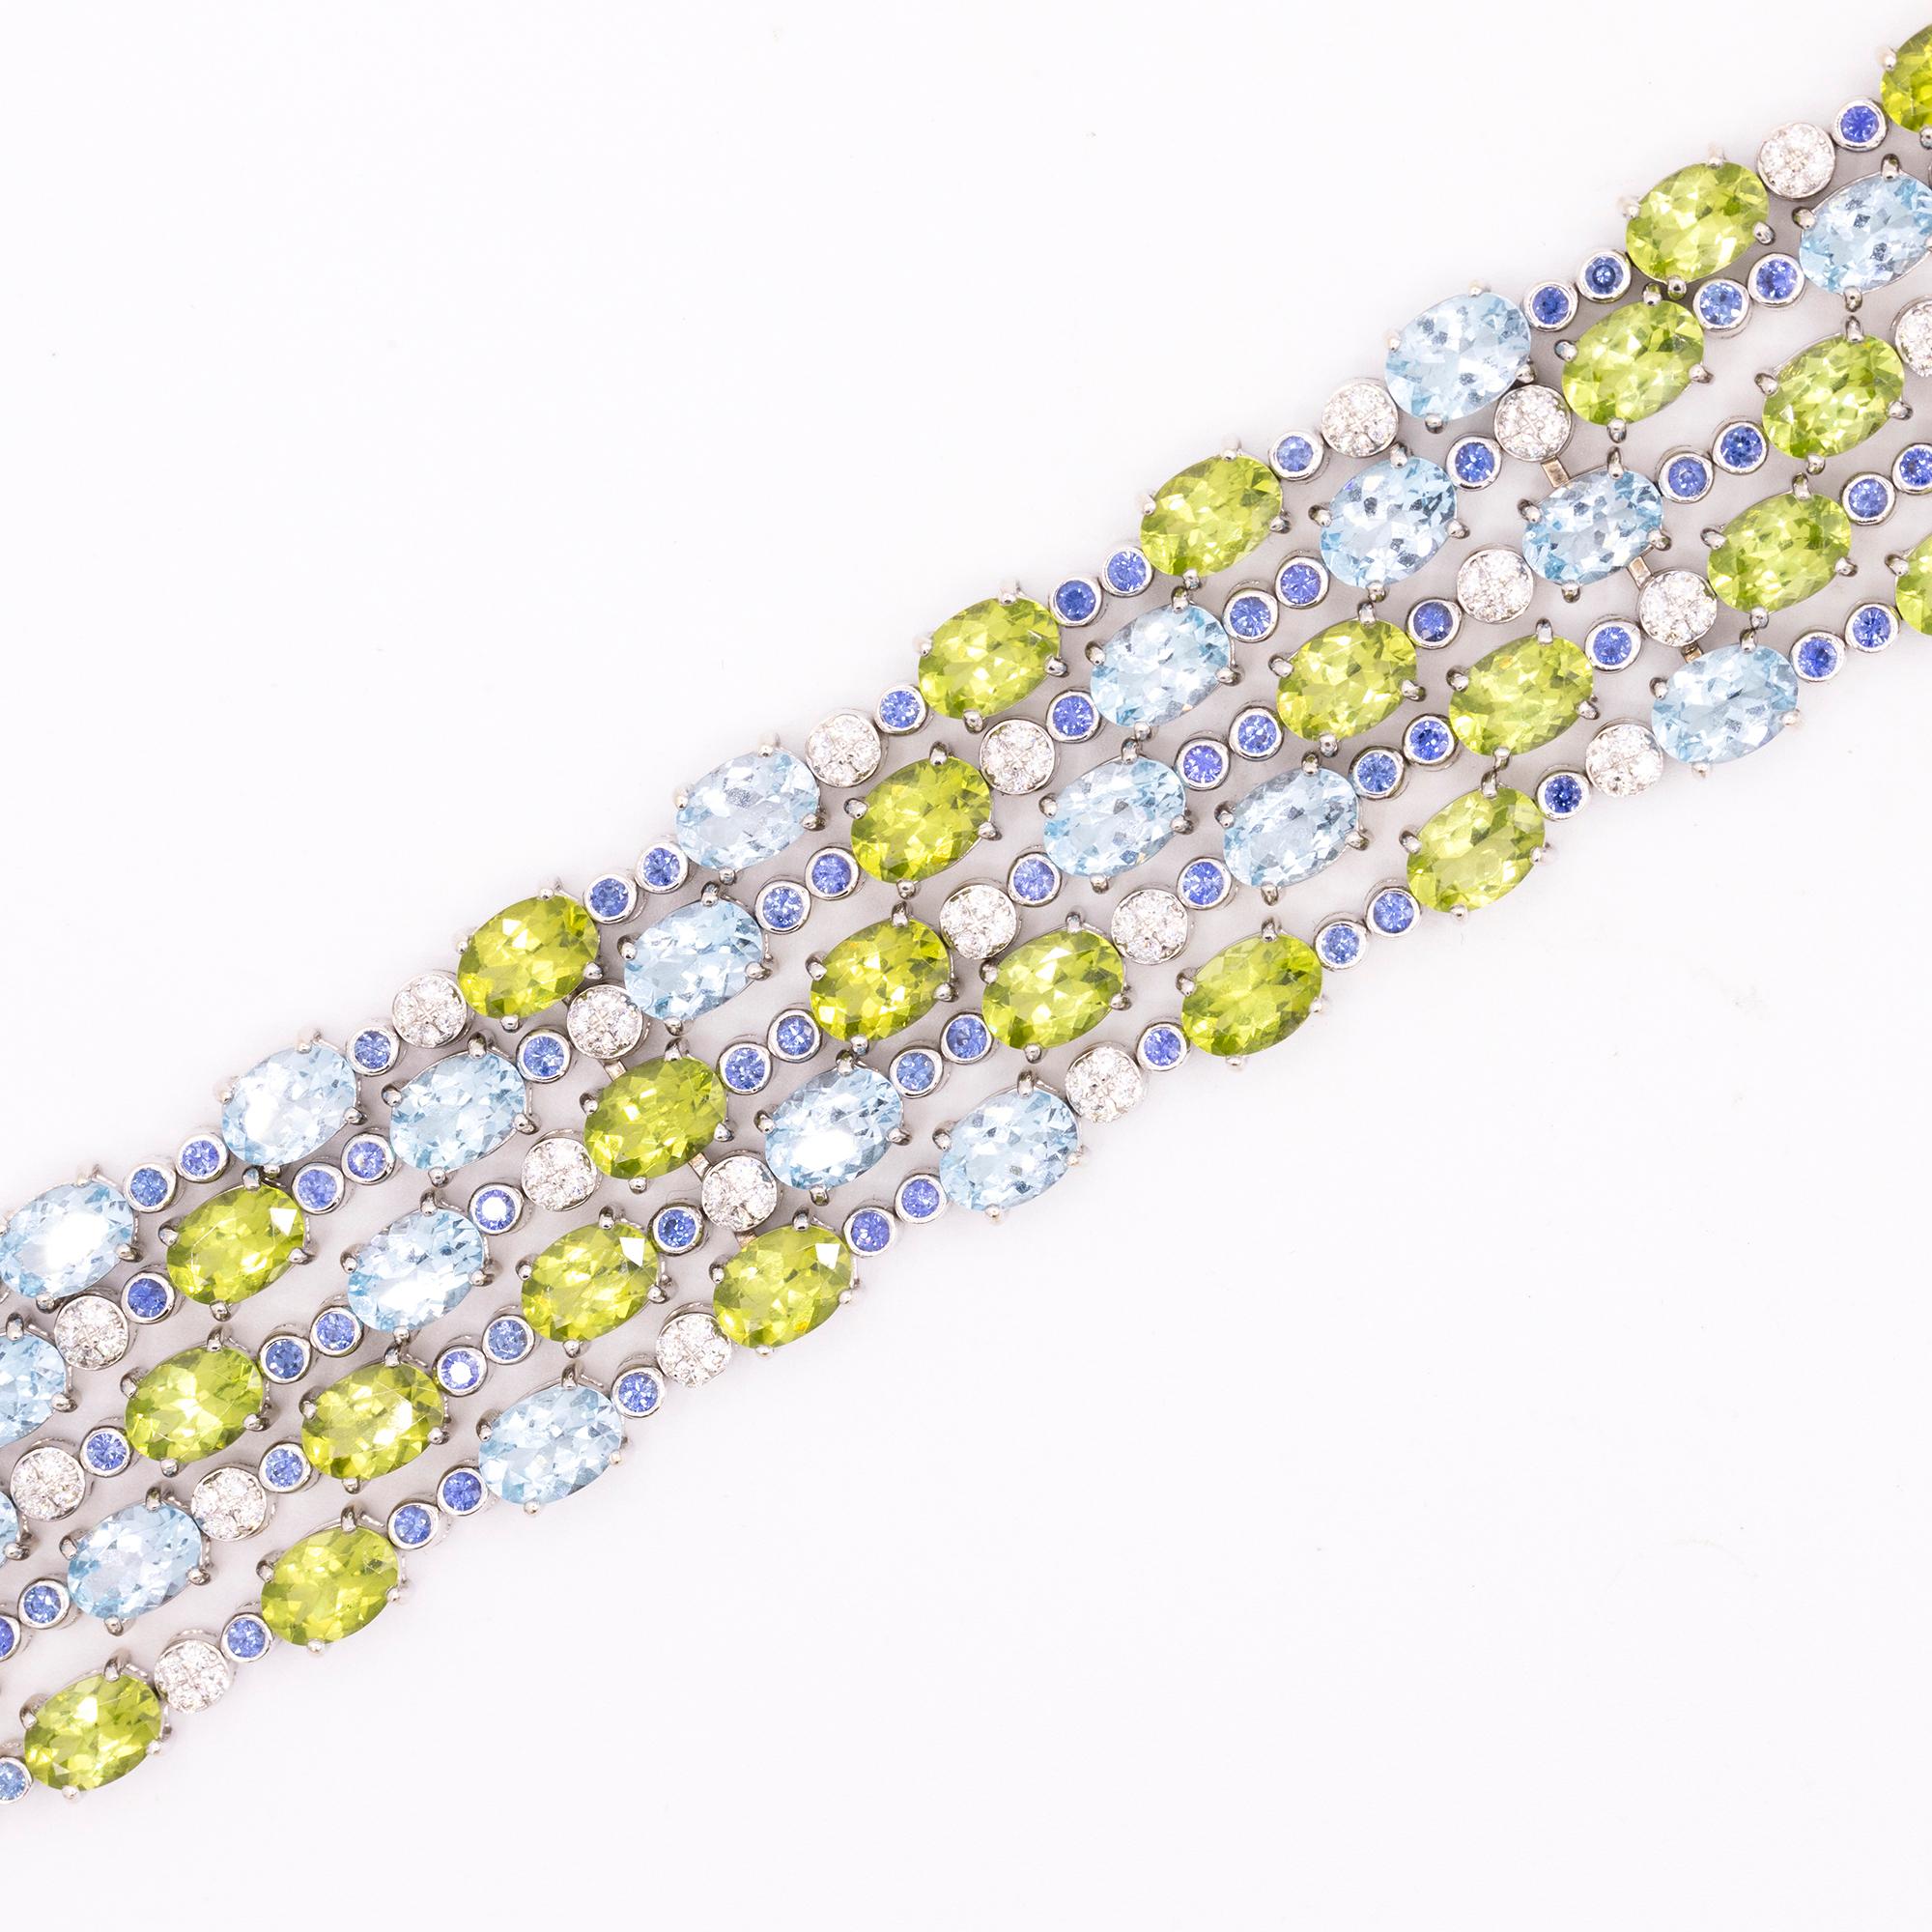 18kt white gold 5 strand bracelet, pave diamond set bar clasp with 30 round brilliant cut diamonds. Total weight is apprx. .60 carats. Each row is set with alternating oval peridots, blue topaz, interspersed with round blue sapphires set in round